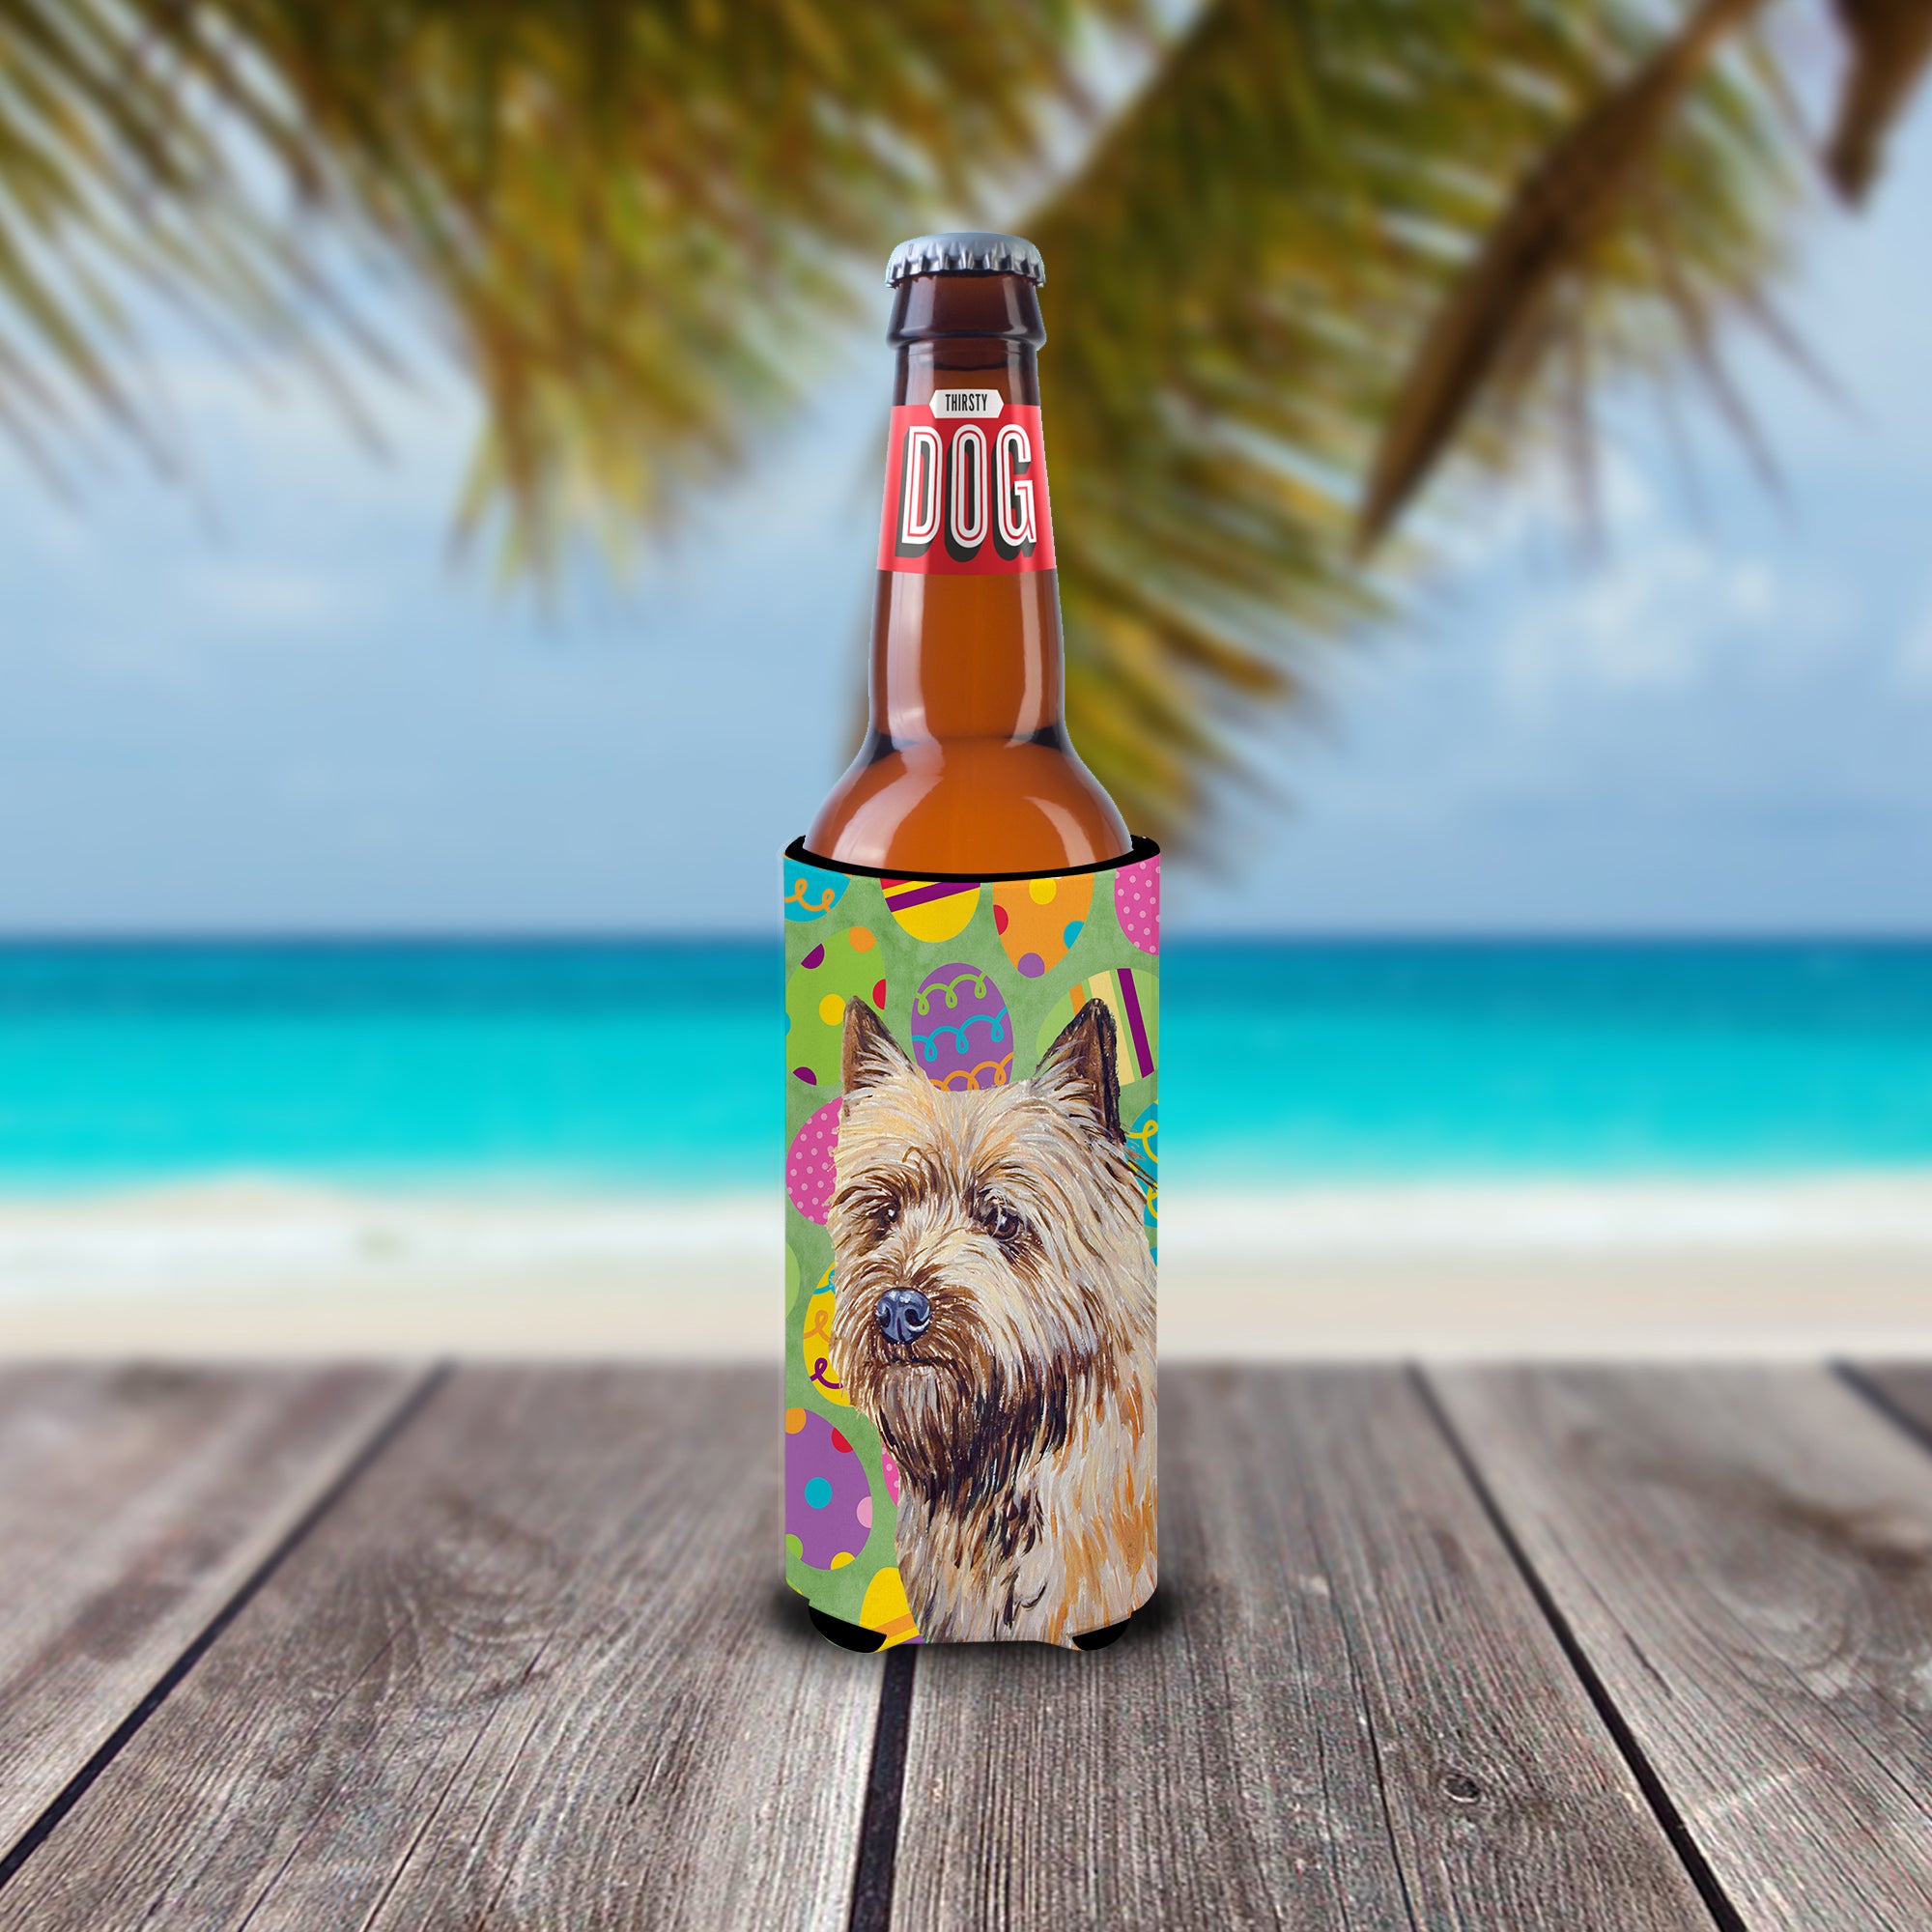 Cairn Terrier Easter Eggtravaganza Ultra Beverage Insulators for slim cans LH9410MUK.